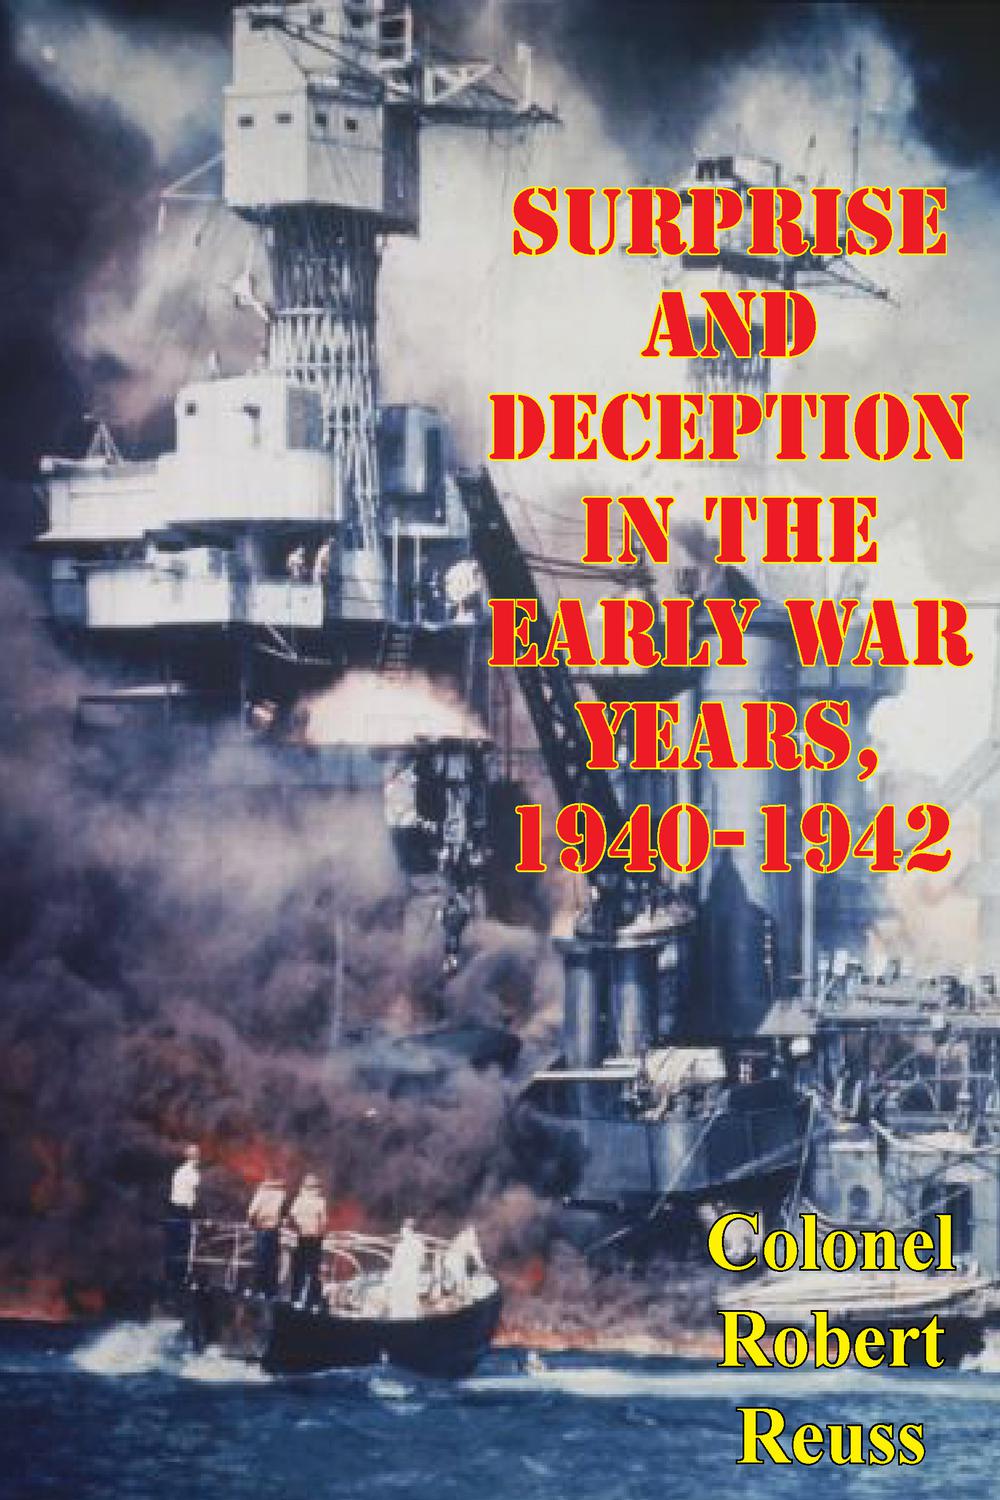 Surprise And Deception In The Early War Years, 1940-1942 - Colonel Robert Reuss